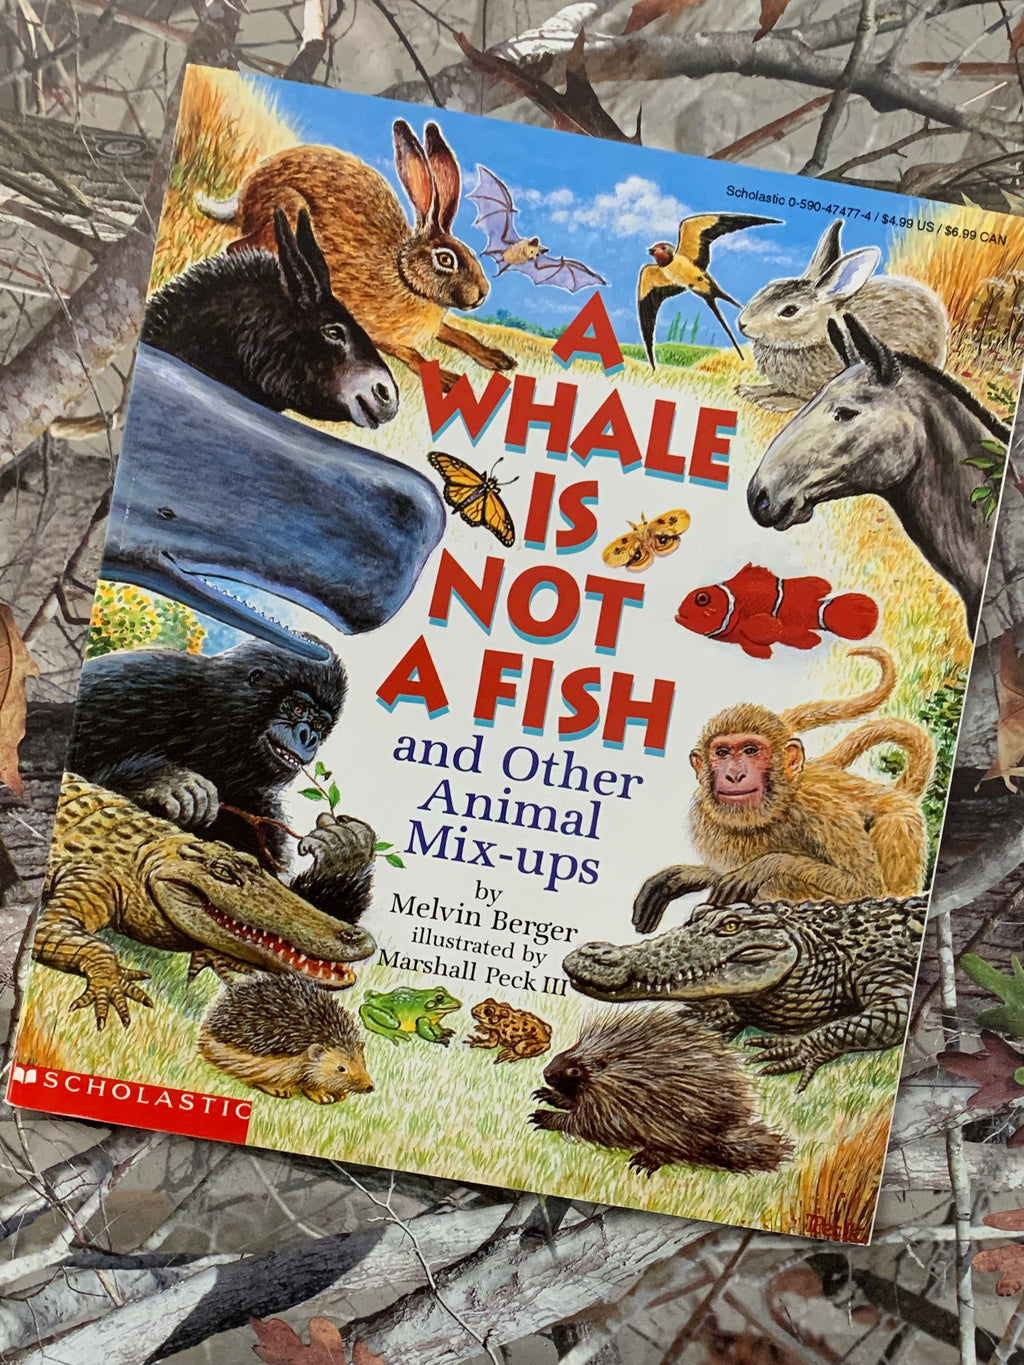 A Whale is Not a Fish: and Other Animal Mix-ups- By Melvin Berger